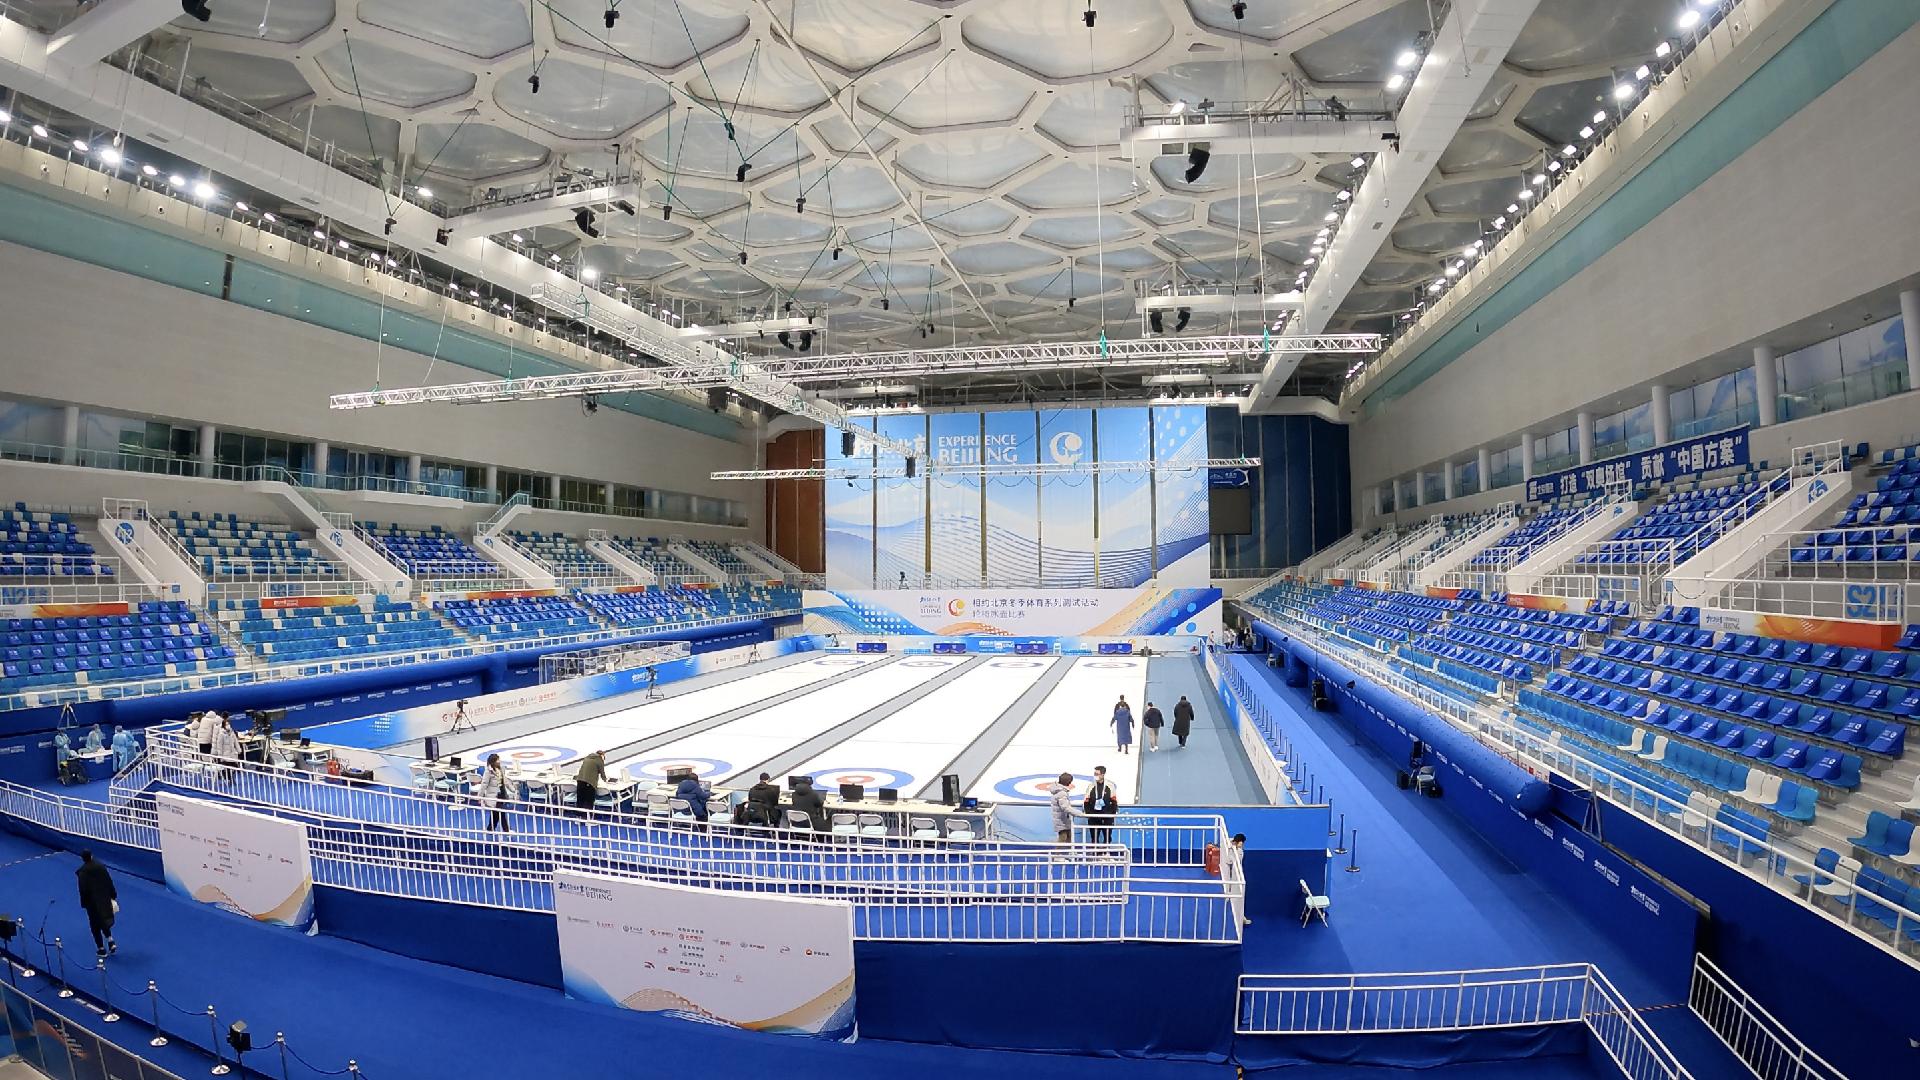 2022 Winter Olympic curling tests underway in Beijing's 'Ice Cube' CGTN